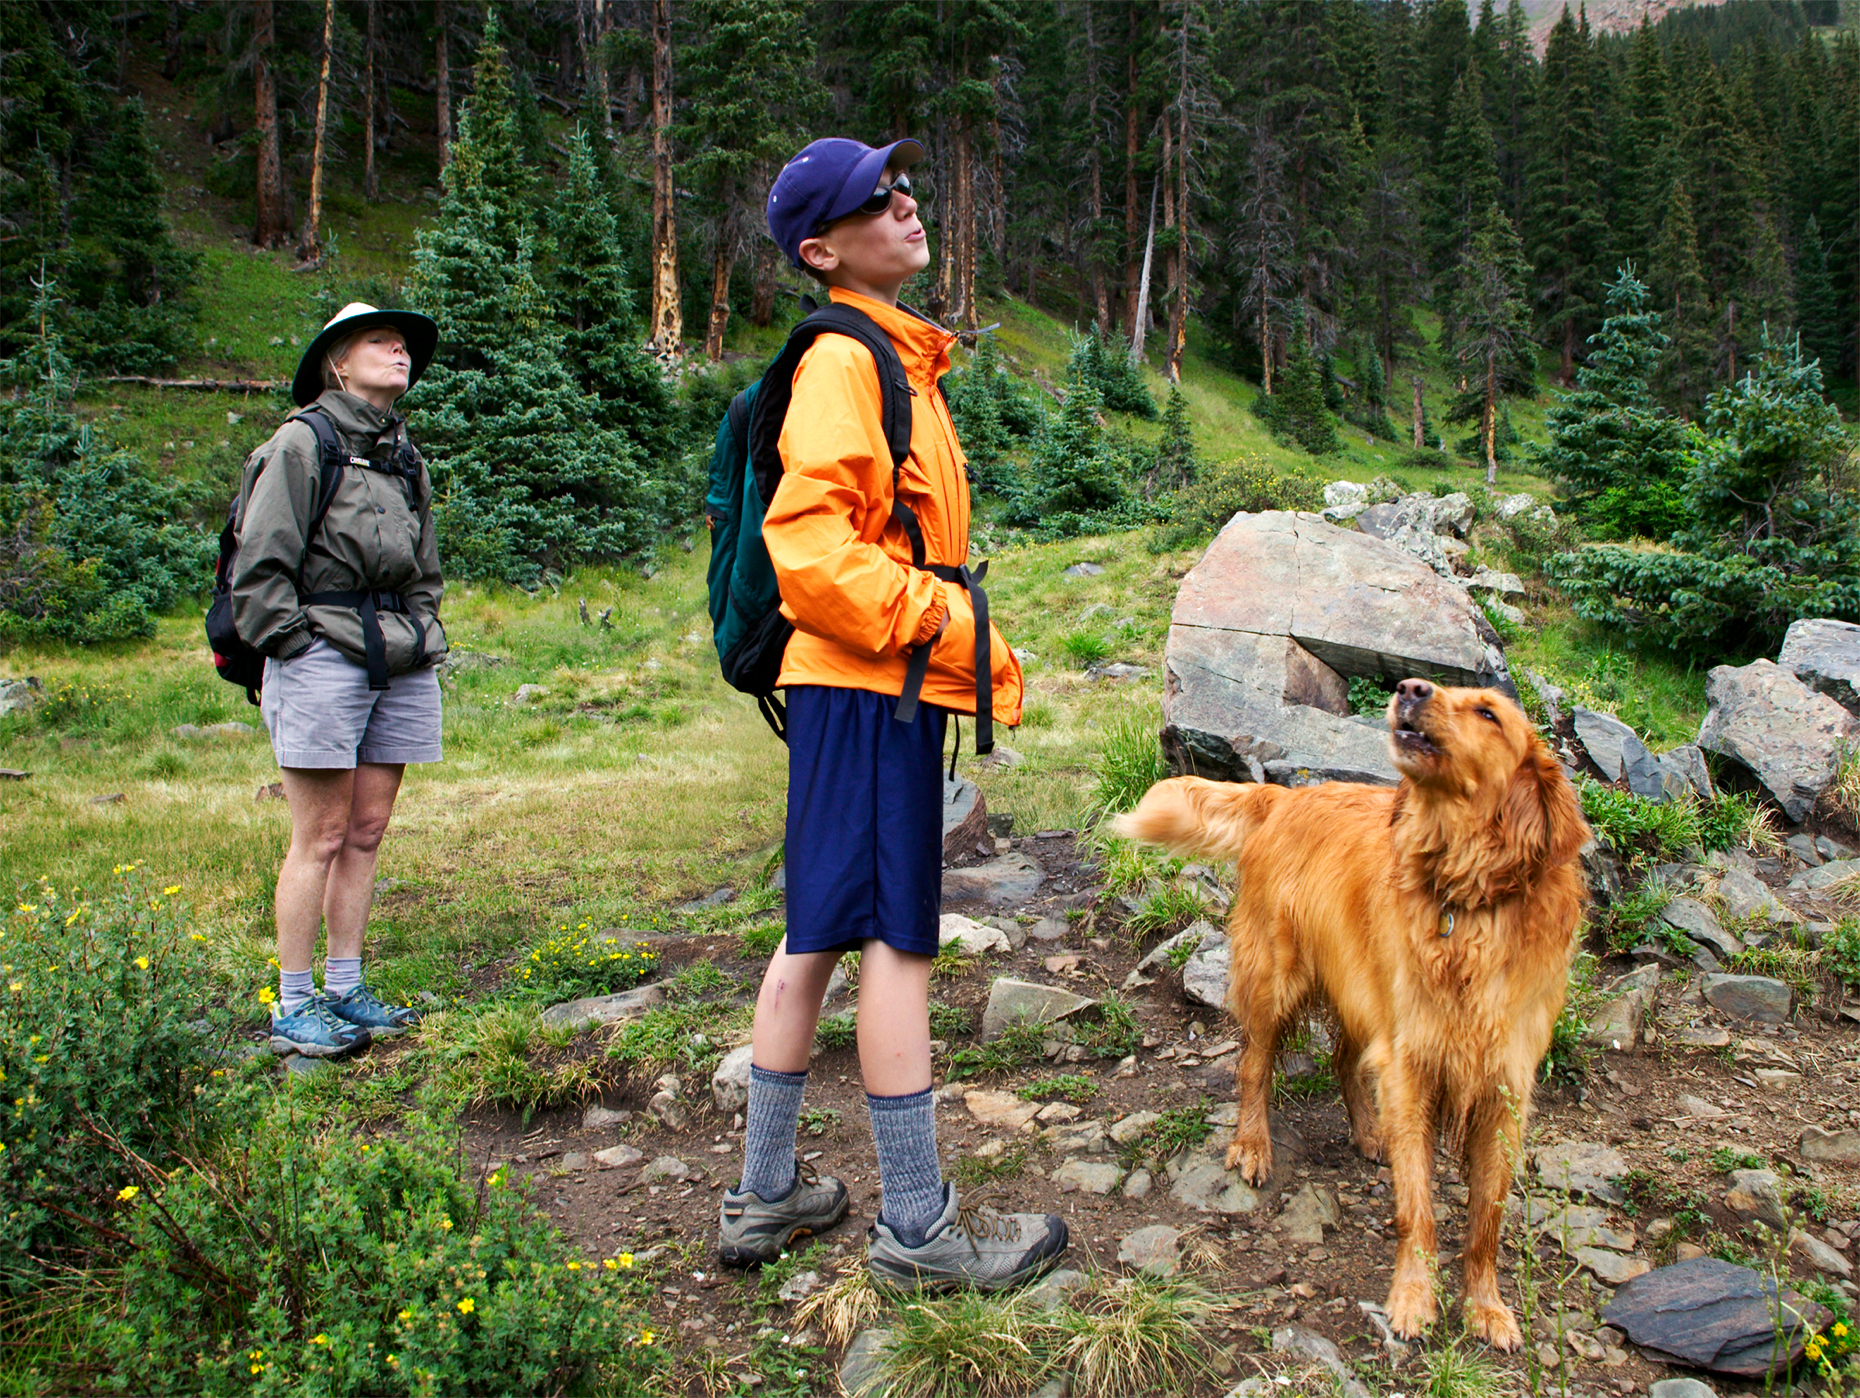 Golden Retriever dog, teenage boy and middle age female hiker all sing near Taos, New Mexico